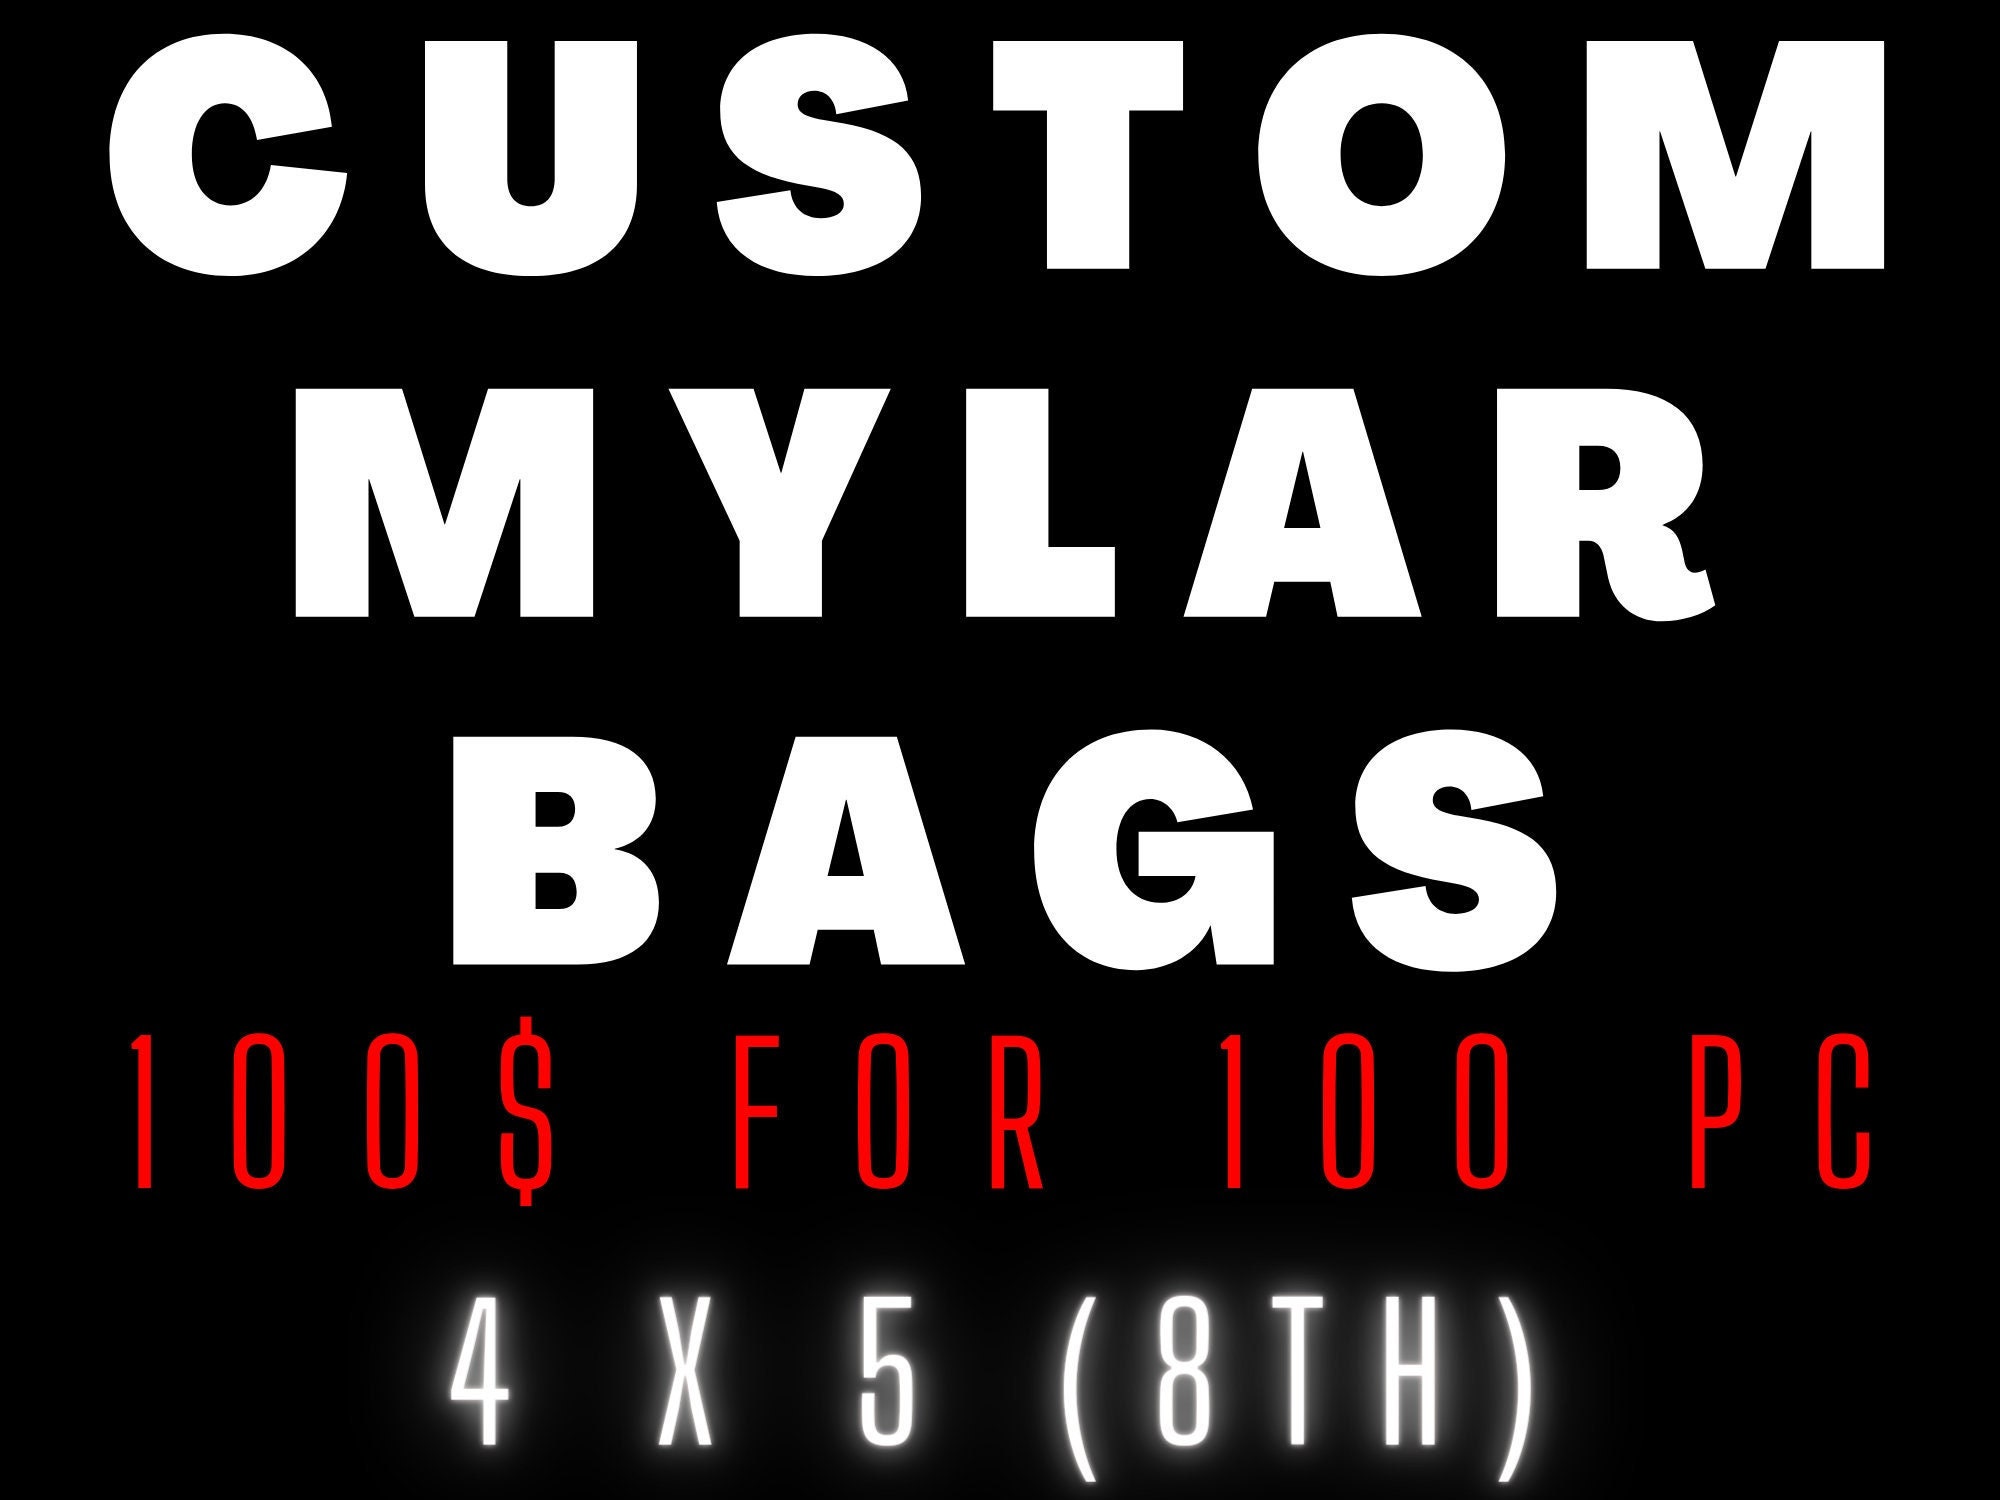 100-pack mylar packaging bags for small business sample bag smell proof  resealable zipper pouch bags jewelry food Lip gloss eyelash phone case  bracelet keychain package supplies etc -front frosted window -cute (Pink